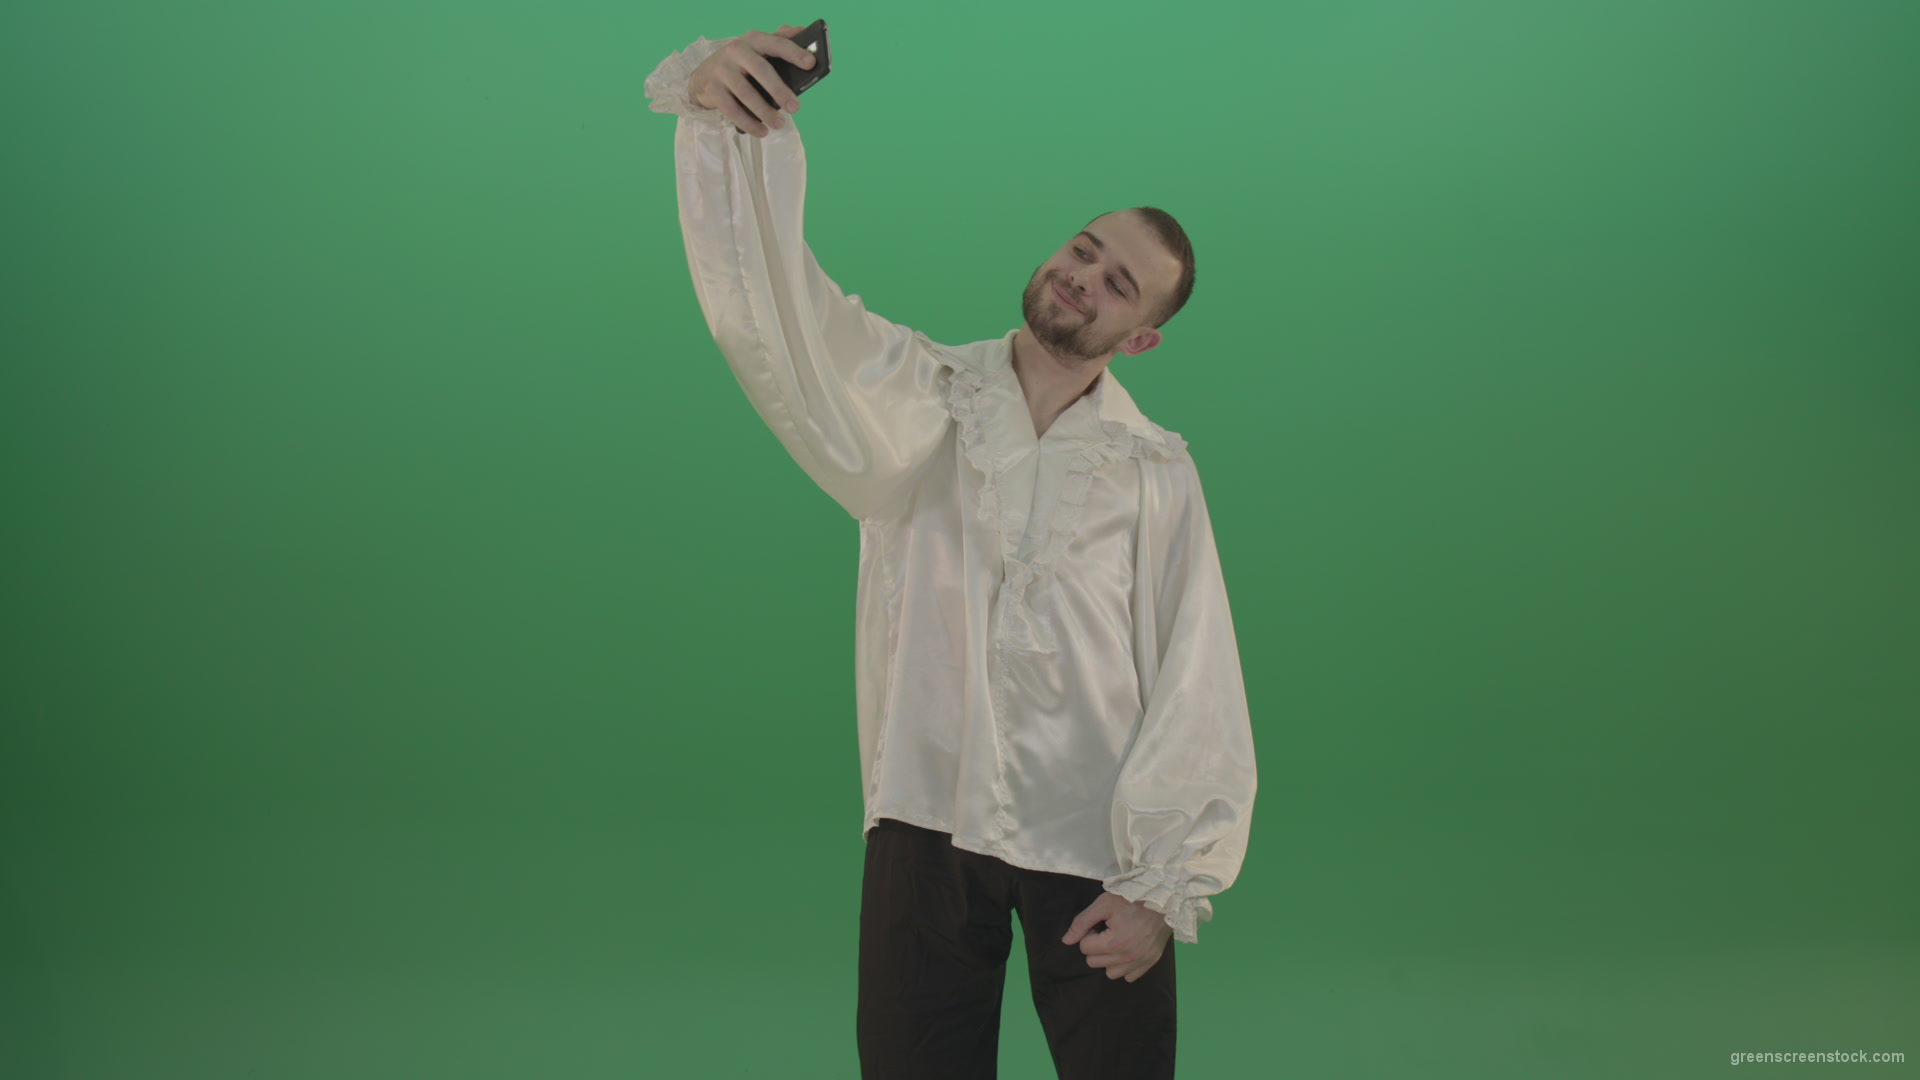 Guy-makes-a-selphi-and-posing-to-the-camera-isolated-on-green-screen_008 Green Screen Stock